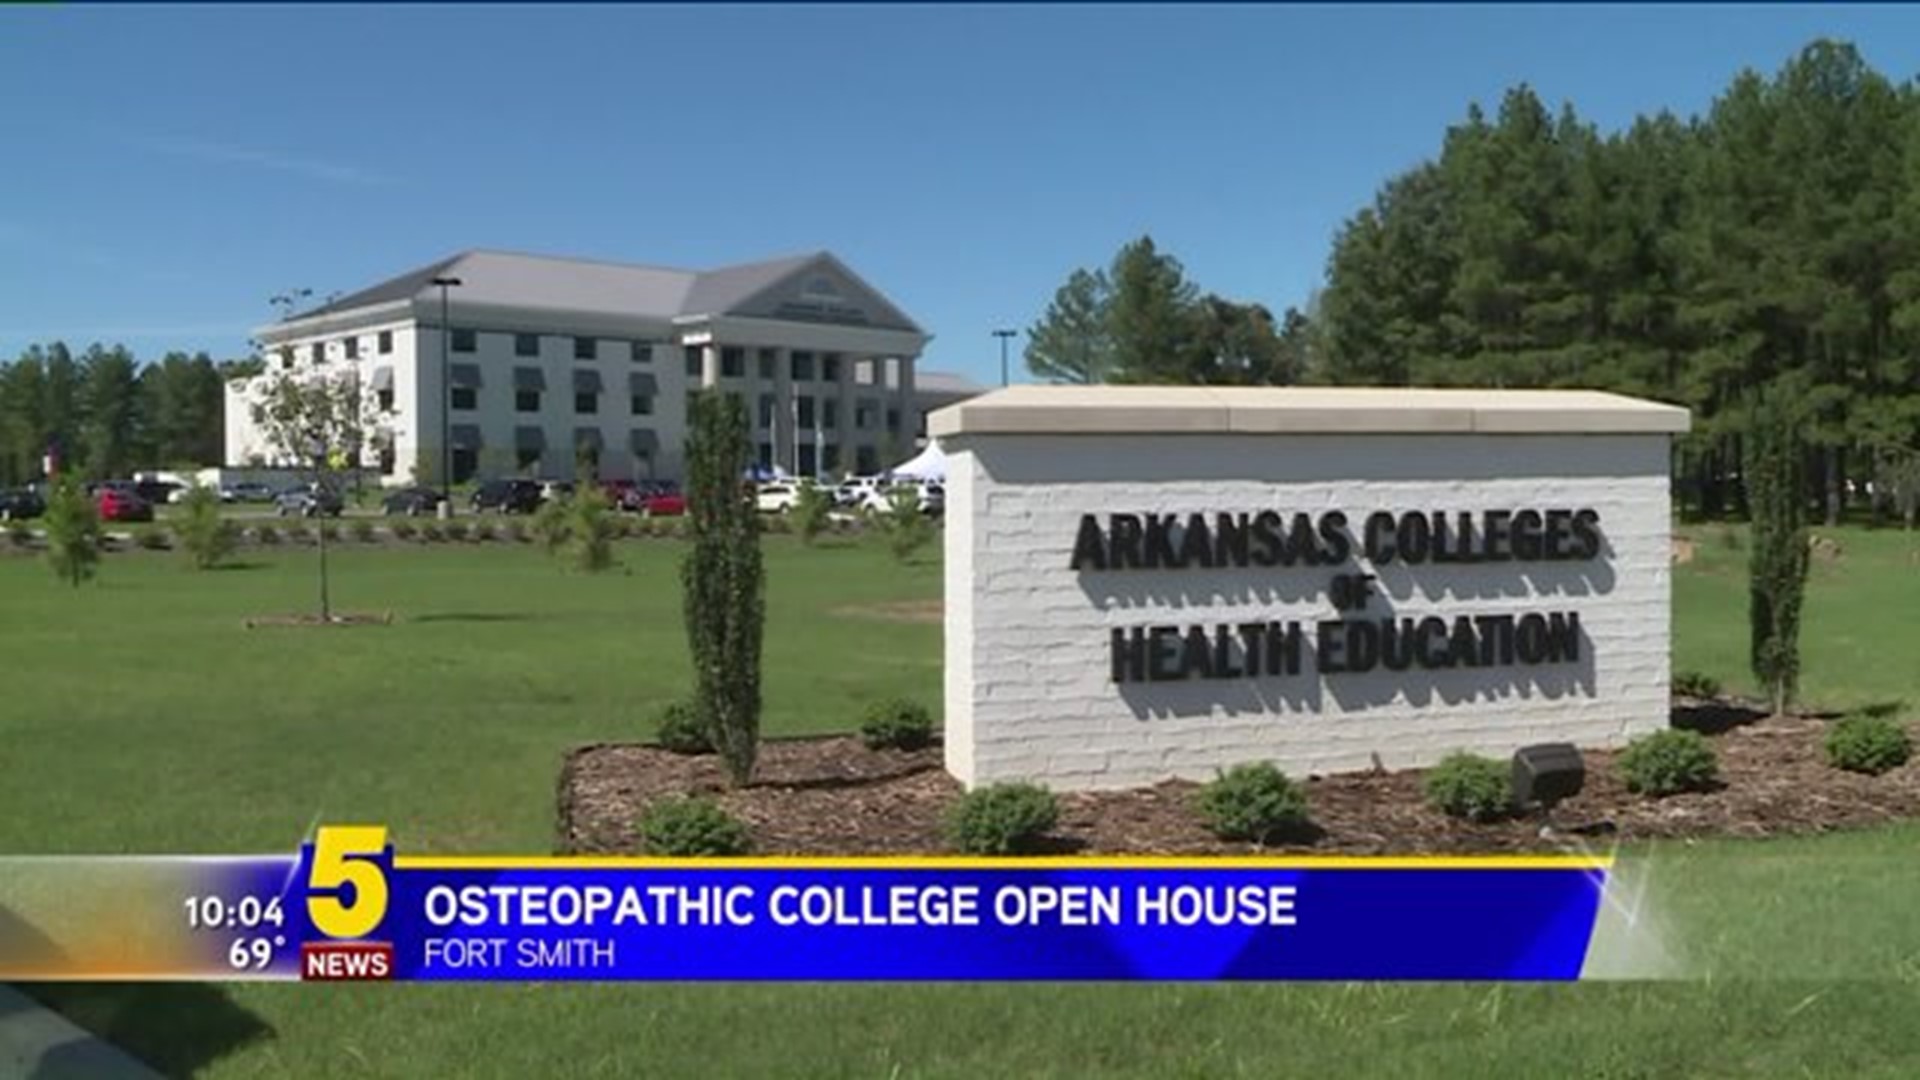 Osteopathic College Open House